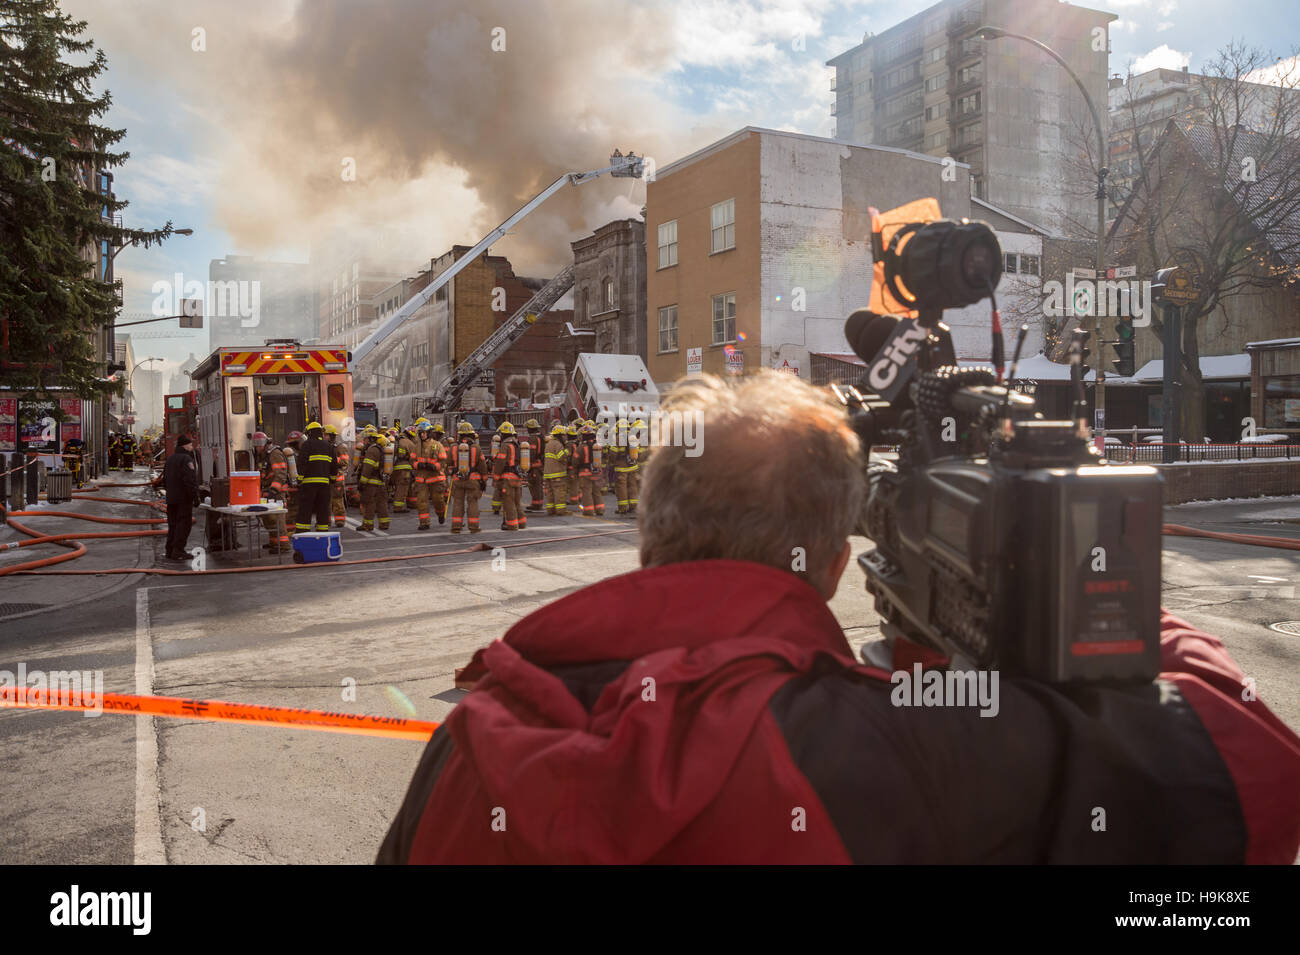 Montreal, CA - 23 Nov 2016: A cameraman is filming firefighters working on 'Cafe Amusement 68' building on fire, 3464 Park Avenue. Stock Photo